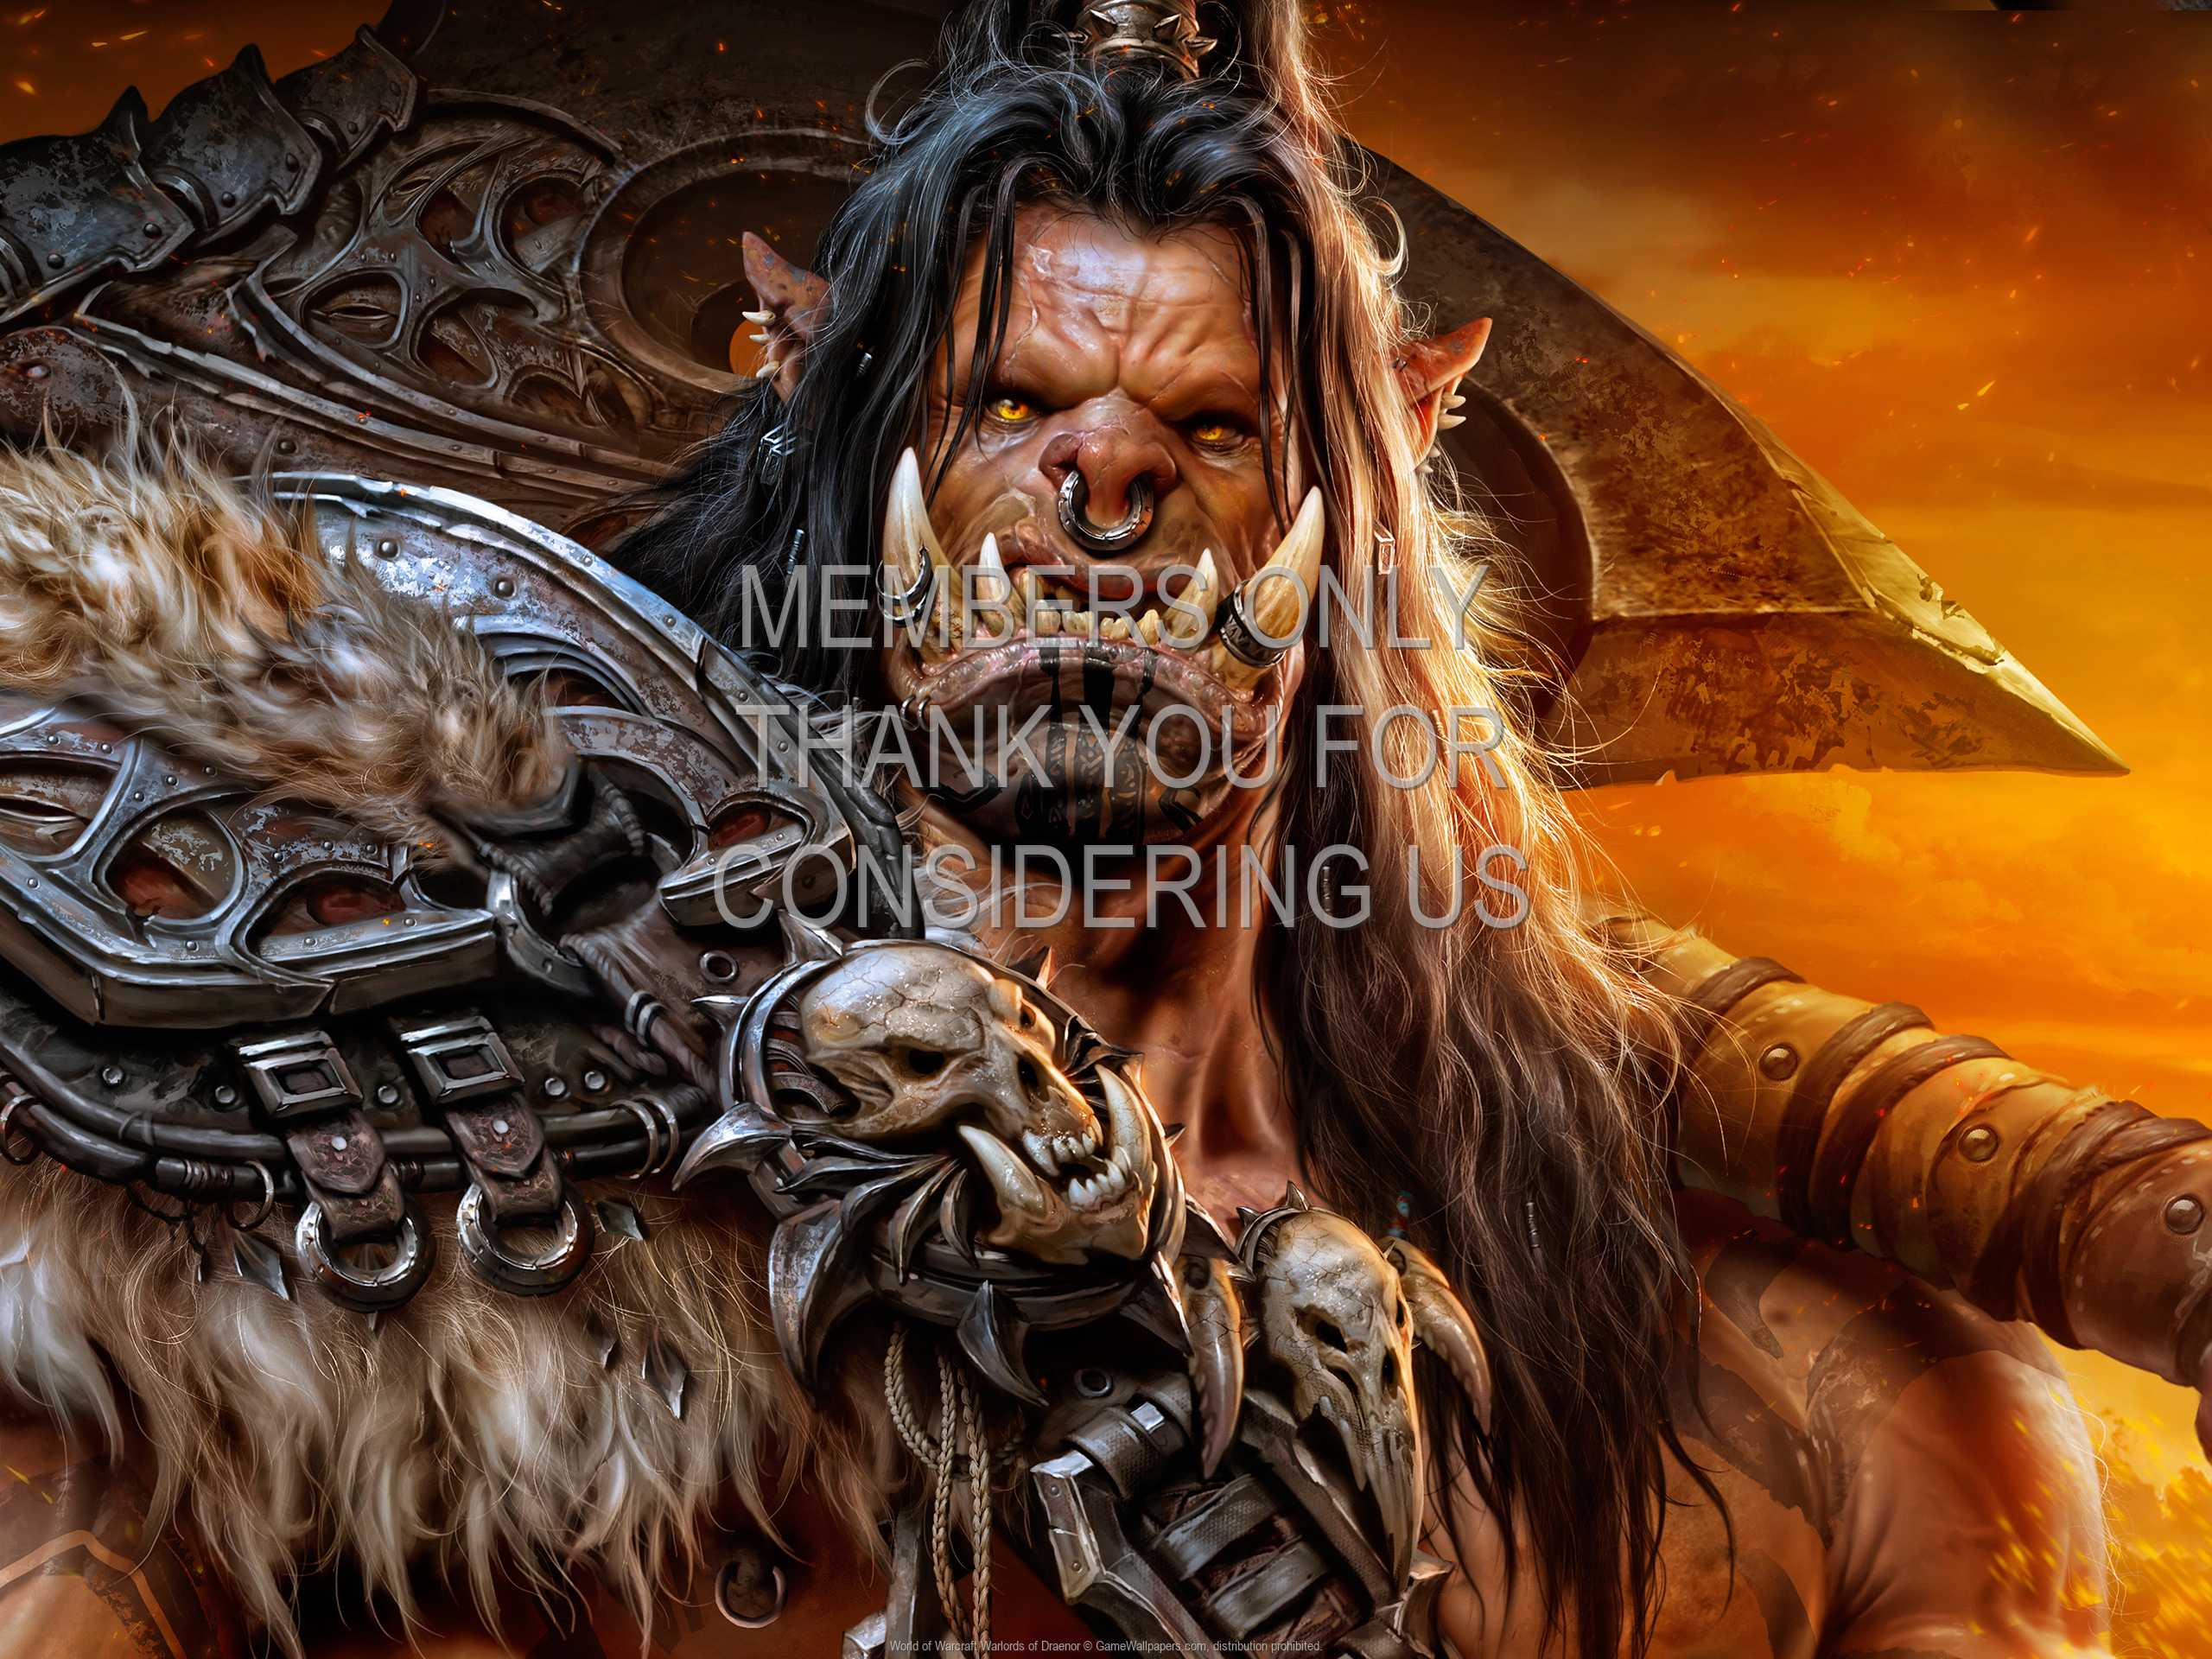 World of Warcraft: Warlords of Draenor 1080p Horizontal Mobiele achtergrond 04